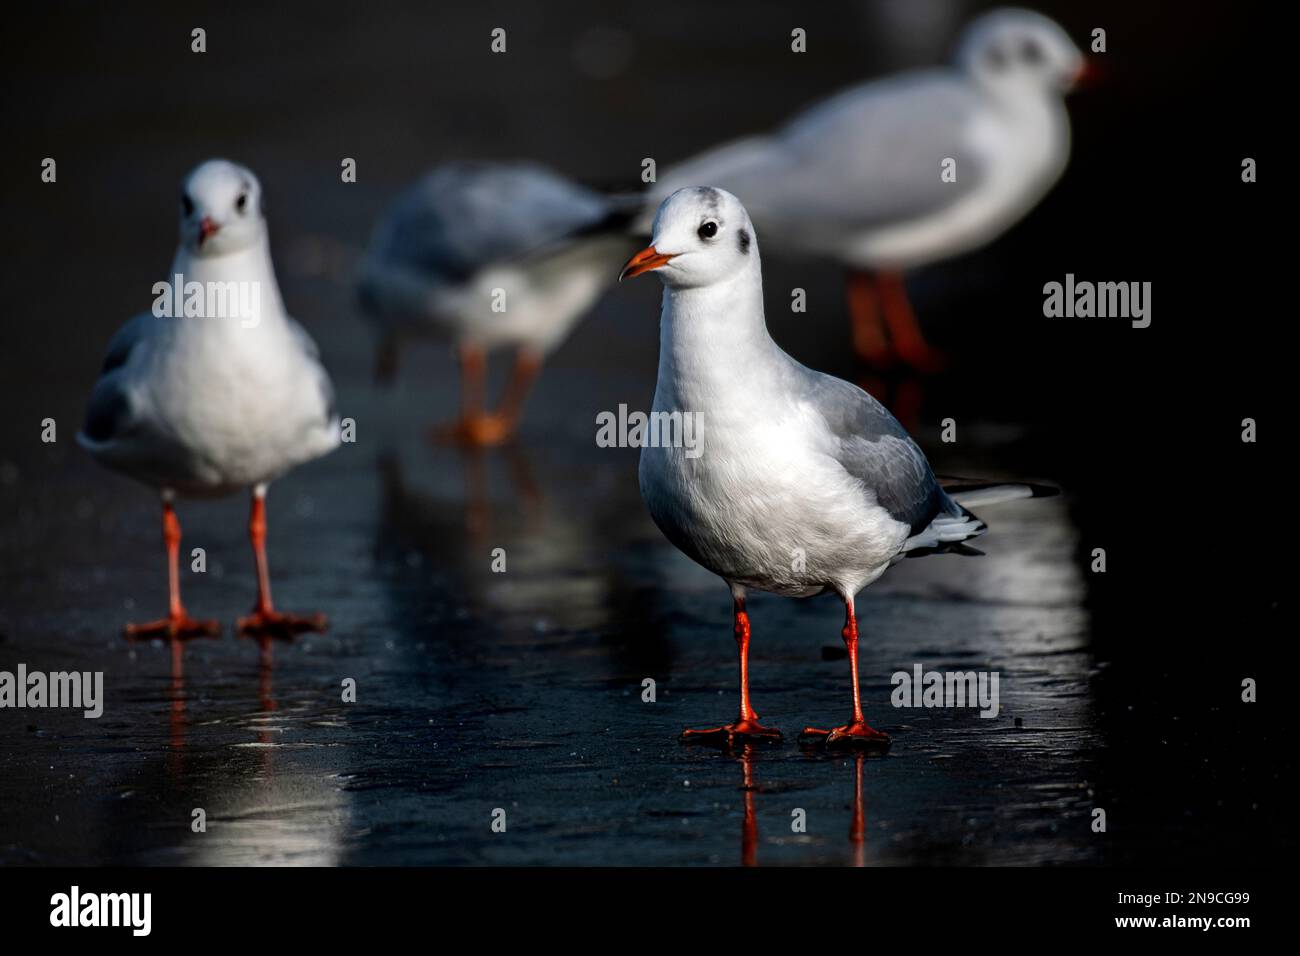 Seagulls on an icy pond in a London park Stock Photo